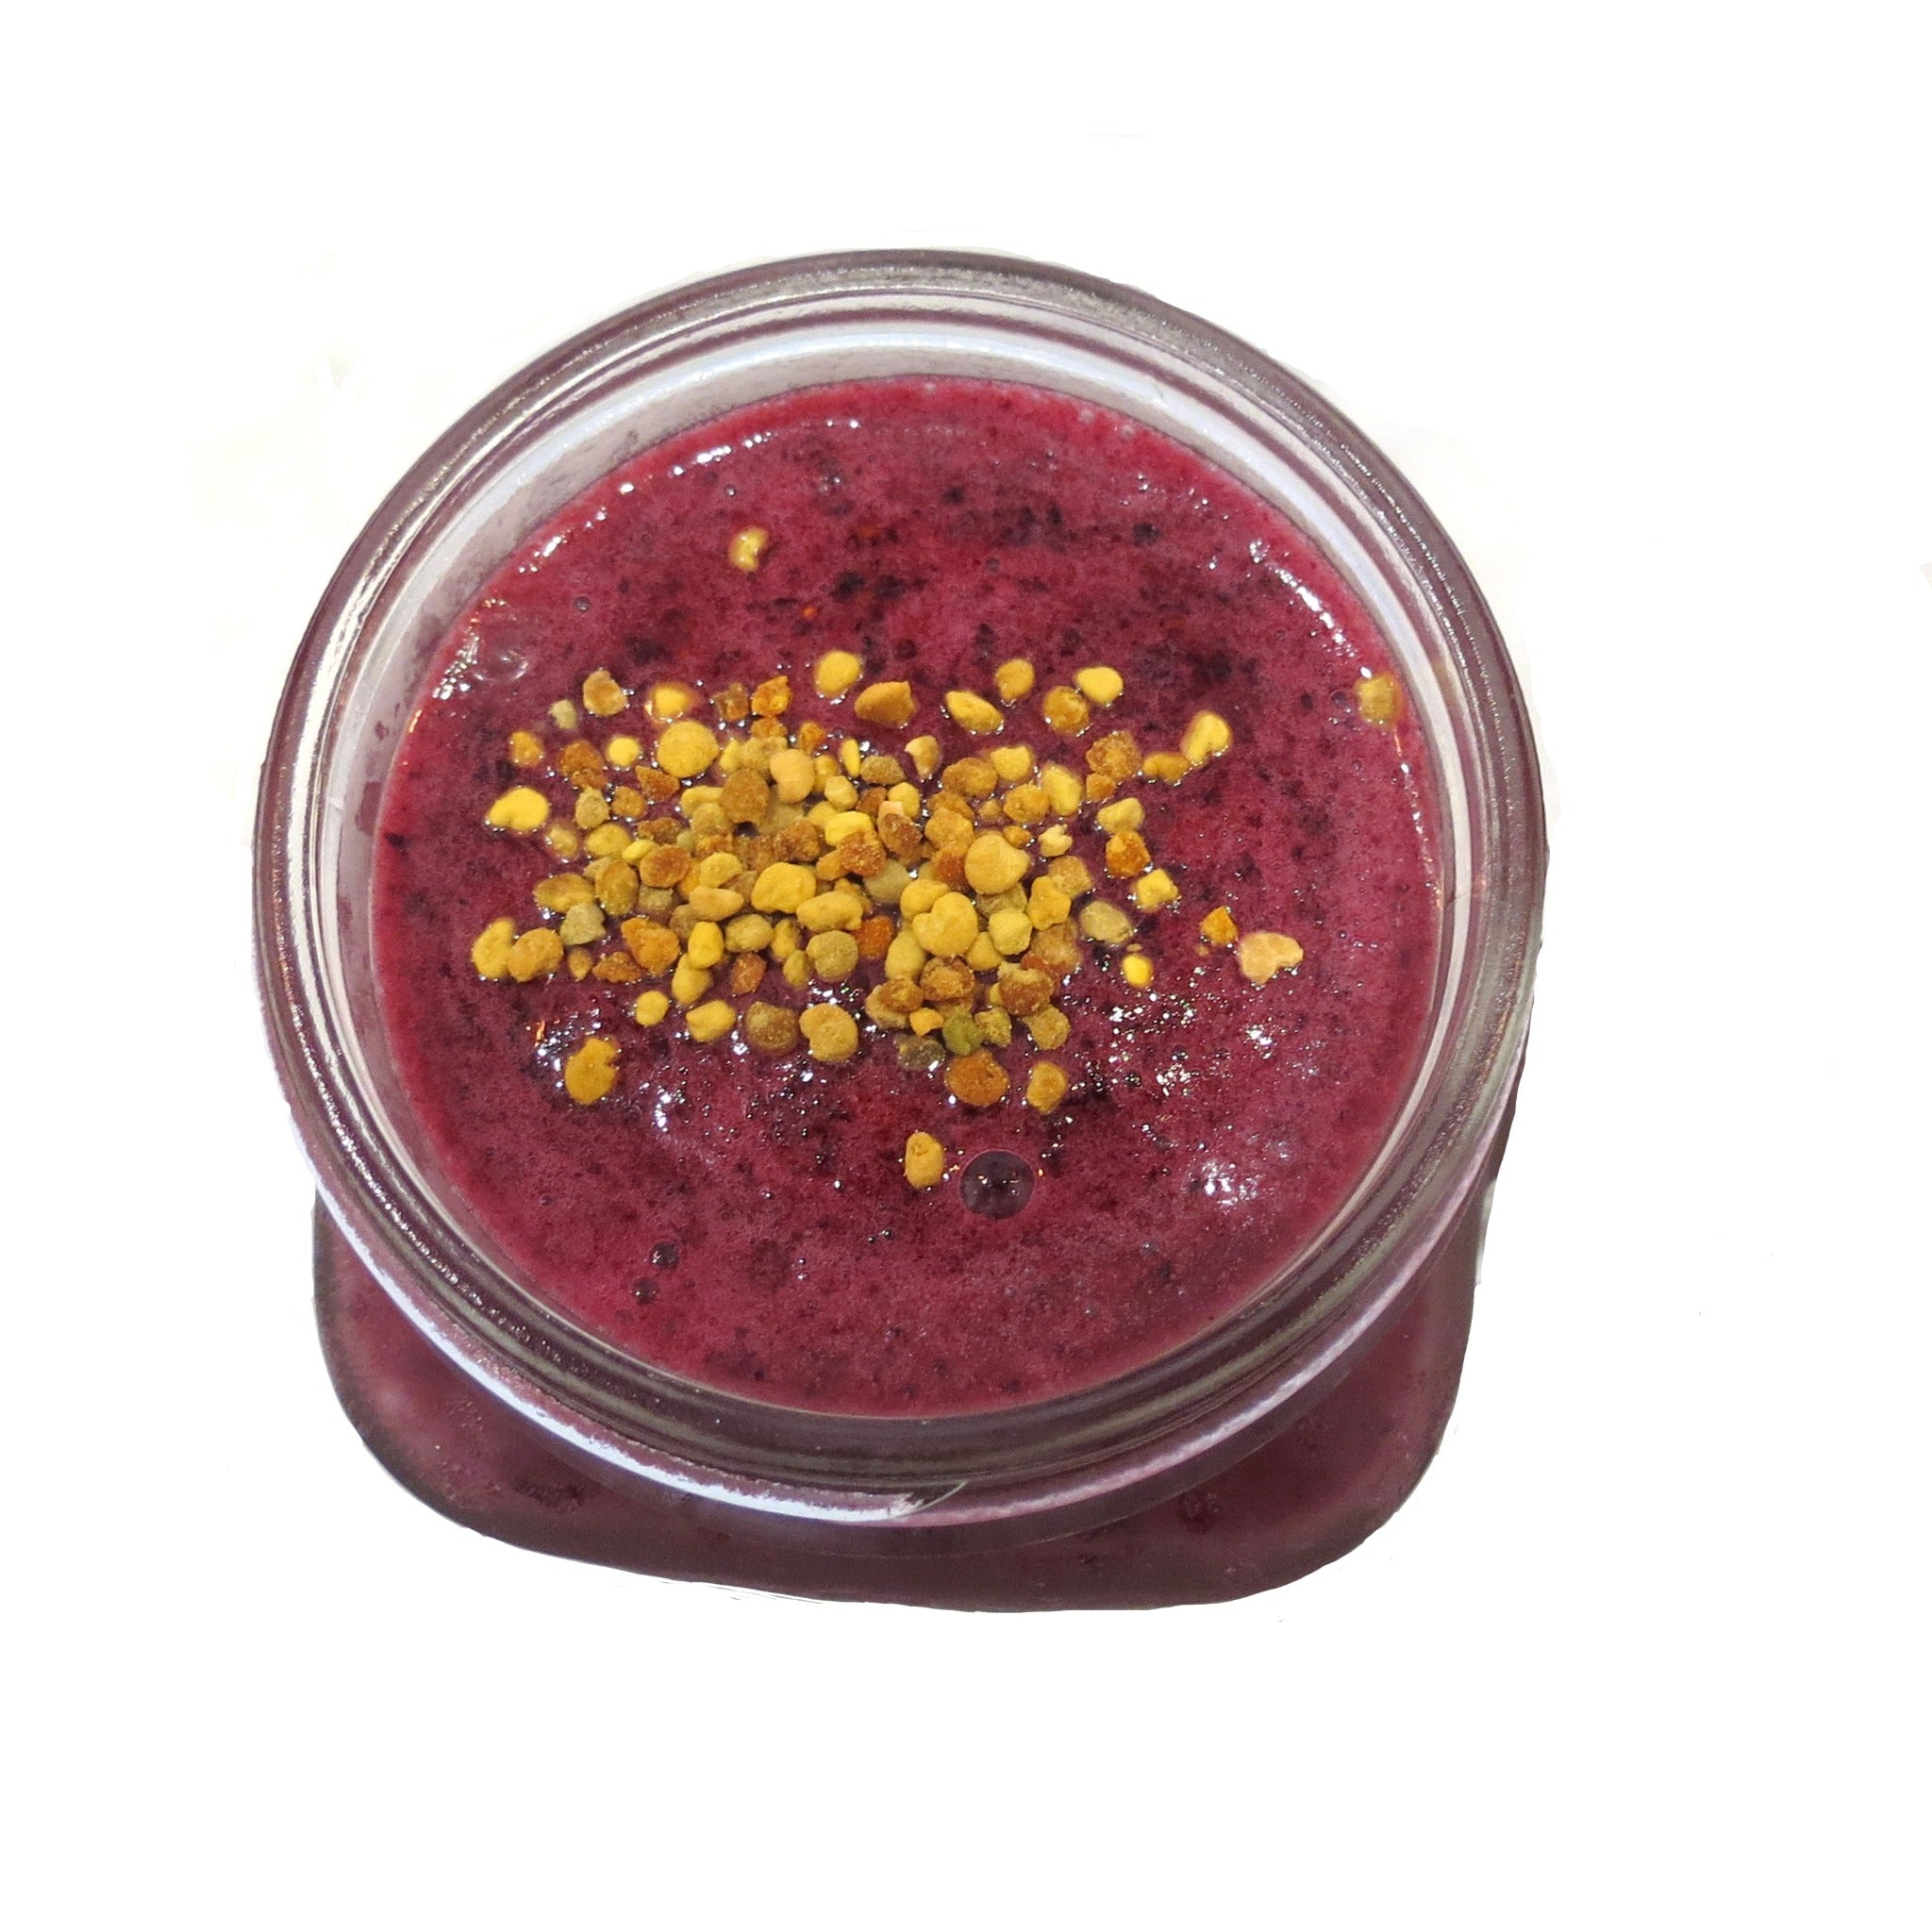 SpaJuiceBar's Cupu Acai smoothie is made with cupuacu, organic acai, wild blueberry, banana, organic apple juice served 16oz Topped with bee pollen. Cupuacu is a fruit from Brazil known as the pharmacy of the amazon.